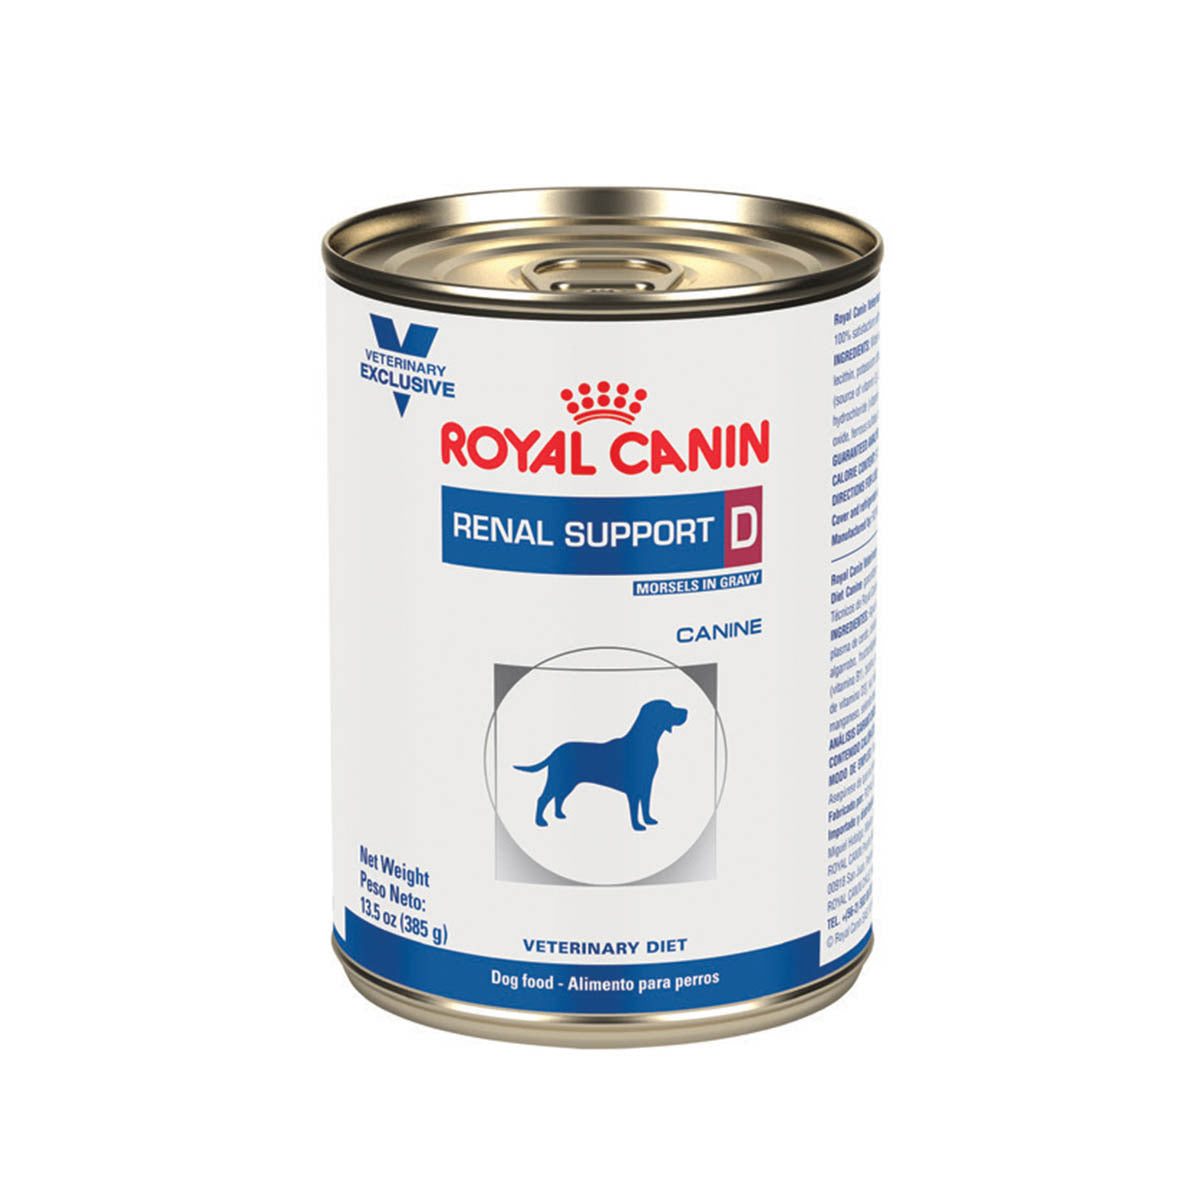 Alimento Para Perro Lata Royal Canin Renal Support D MIG Canine 385 g, perro, Royal Canin, Mister Mascotas